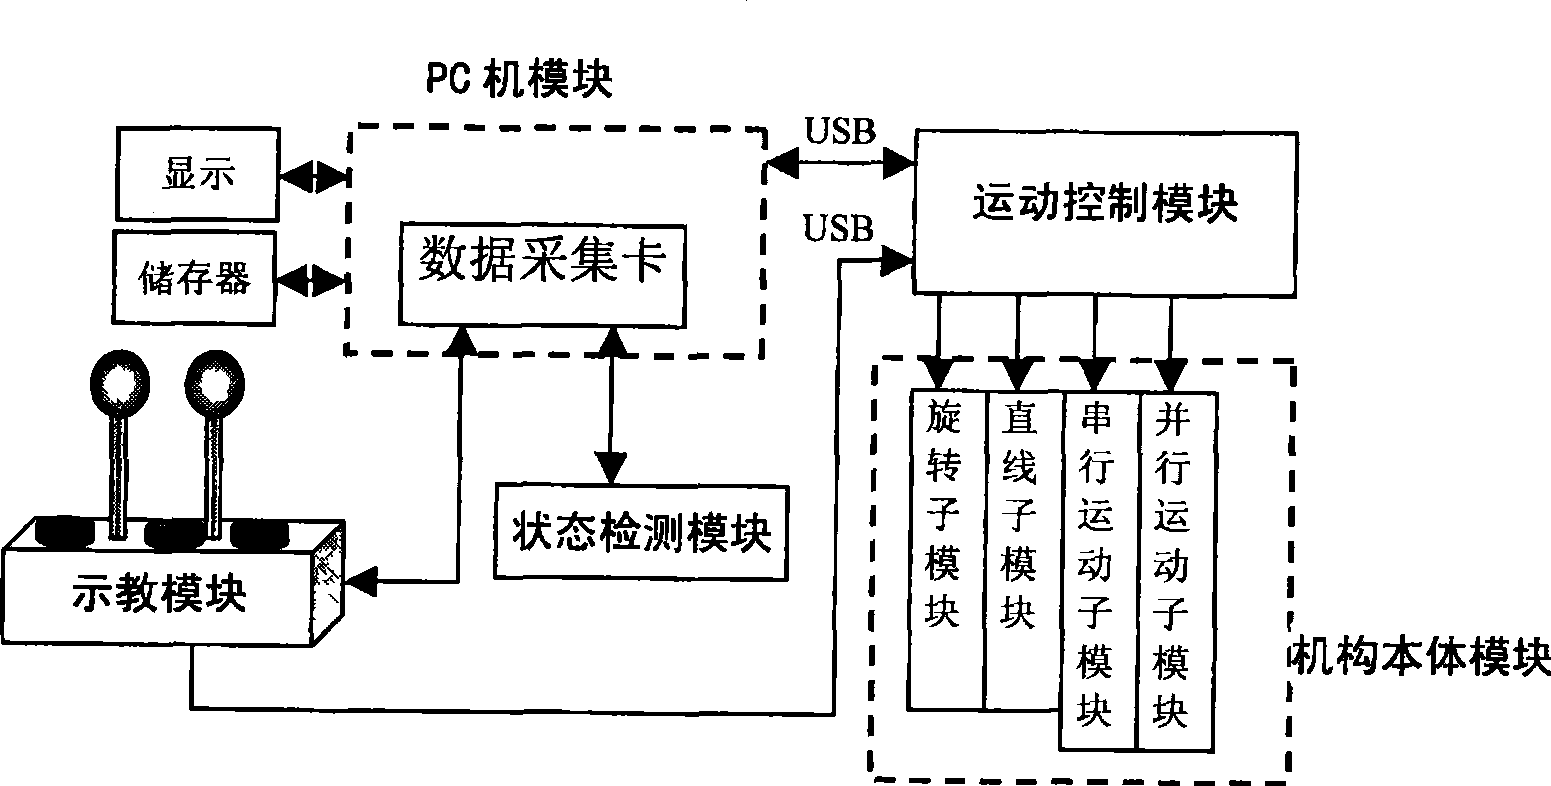 General-purpose electromechnical equipment motion control demonstration and reproducing system